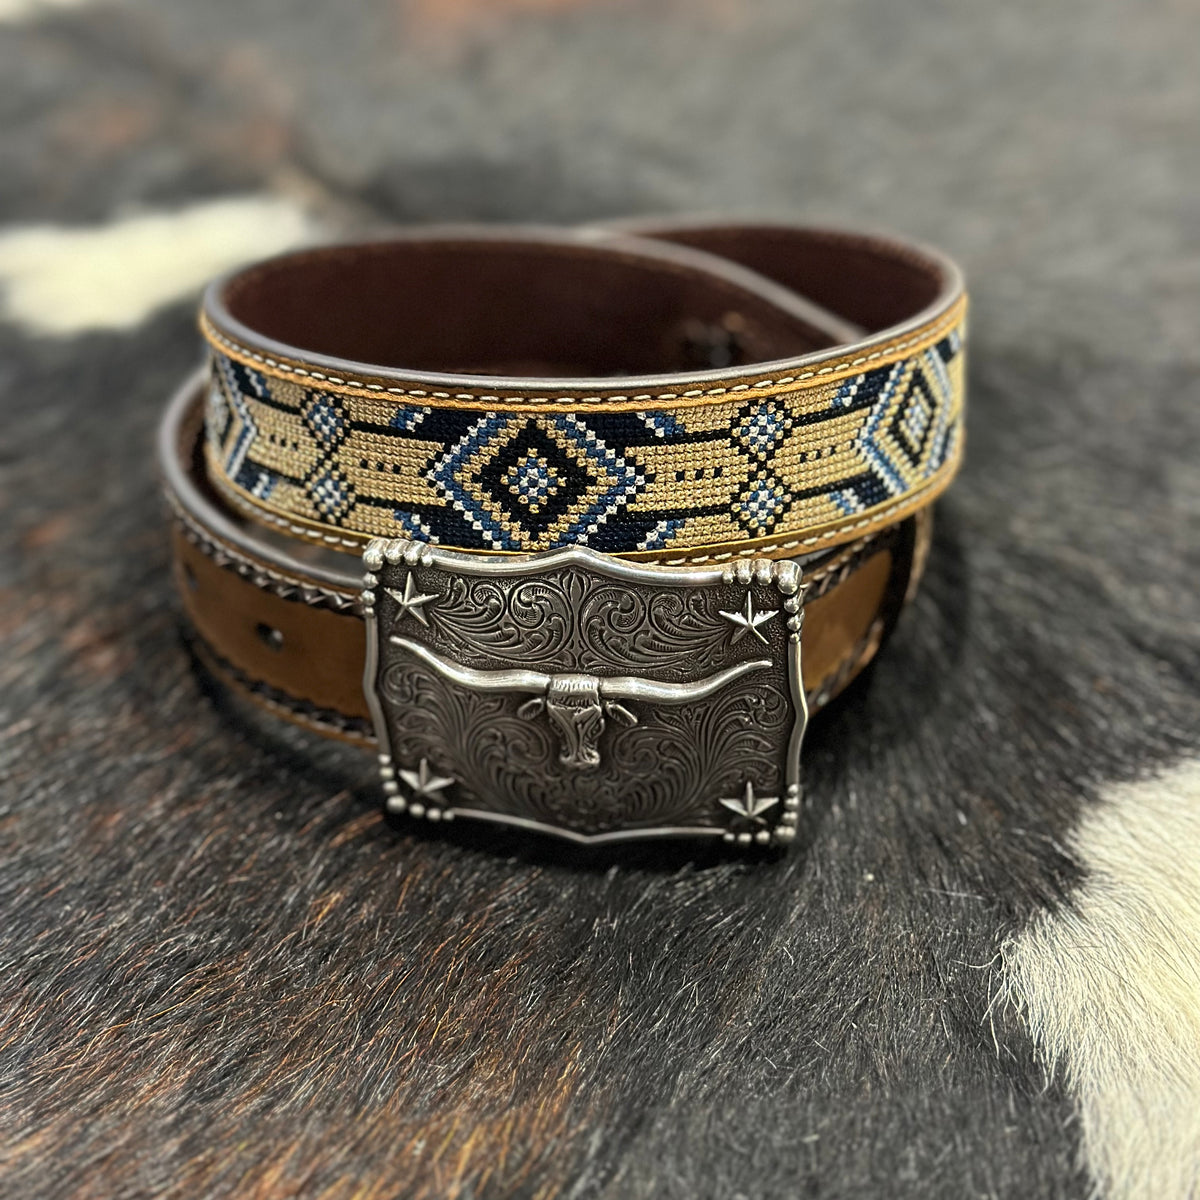 3D Belt Company Boys Aztec Embroidery with Square Bullhead Buckle